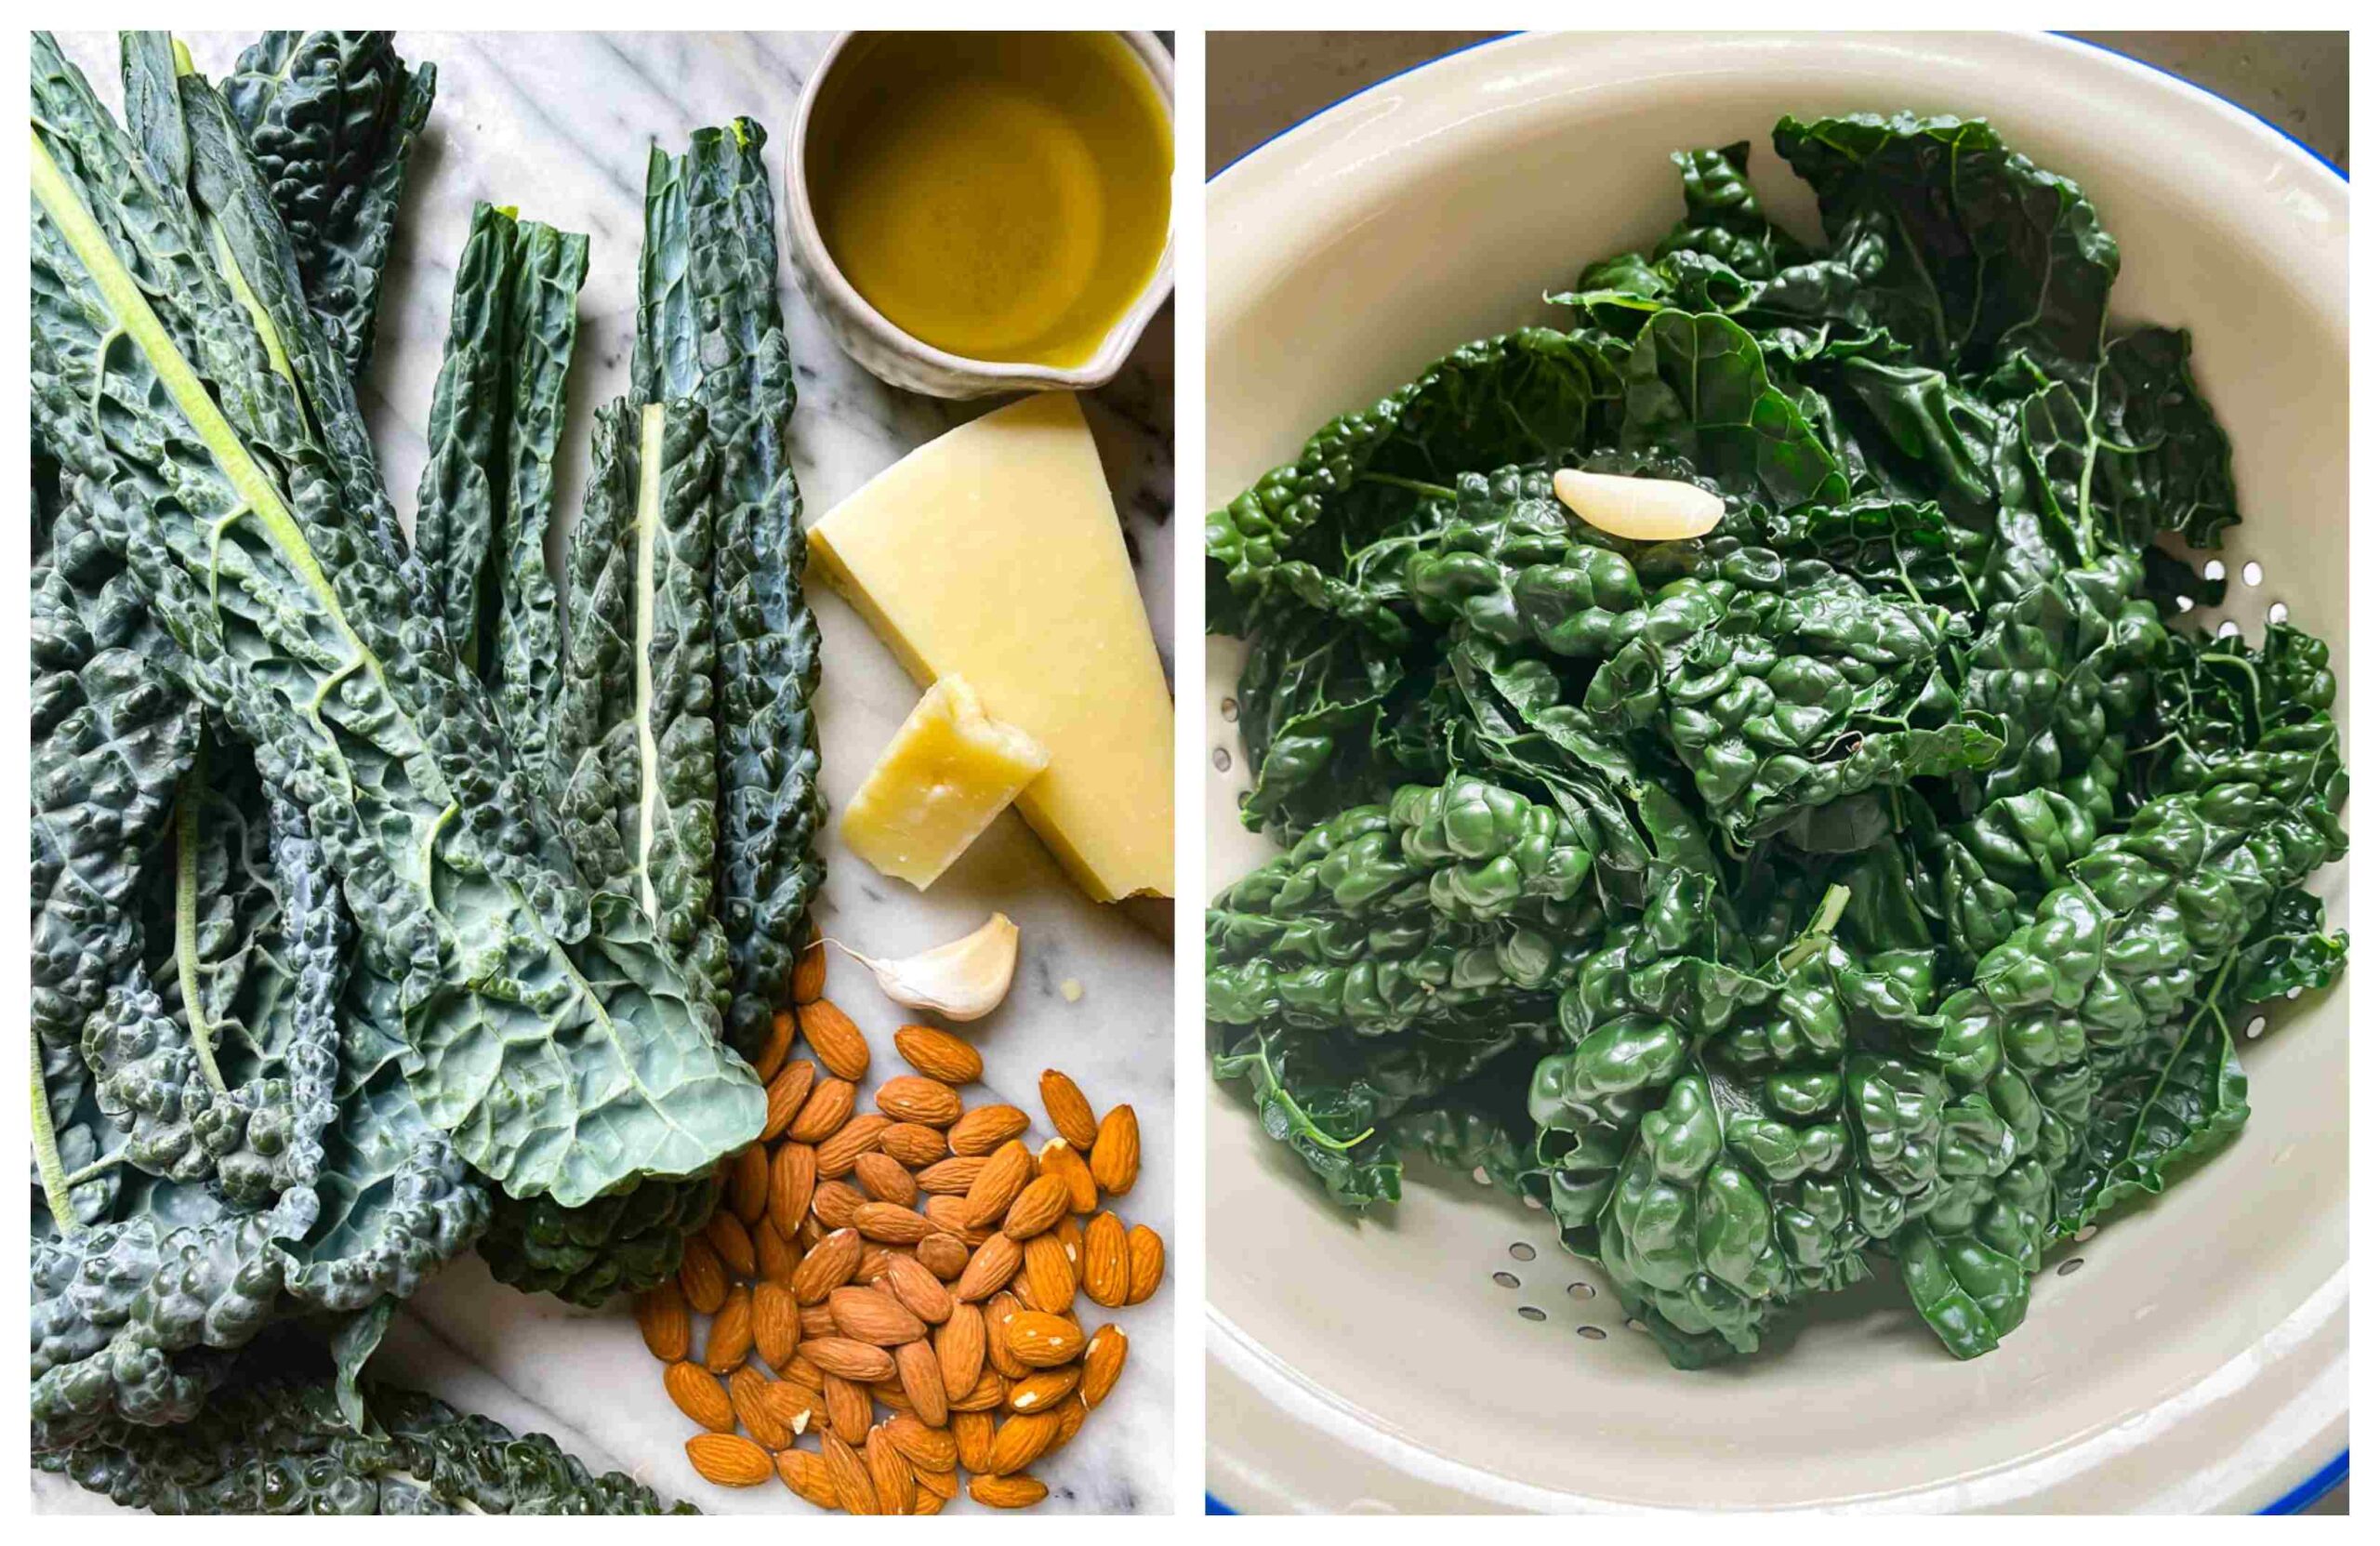 cavolo nero raw and cooked plus other ingredients for pesto